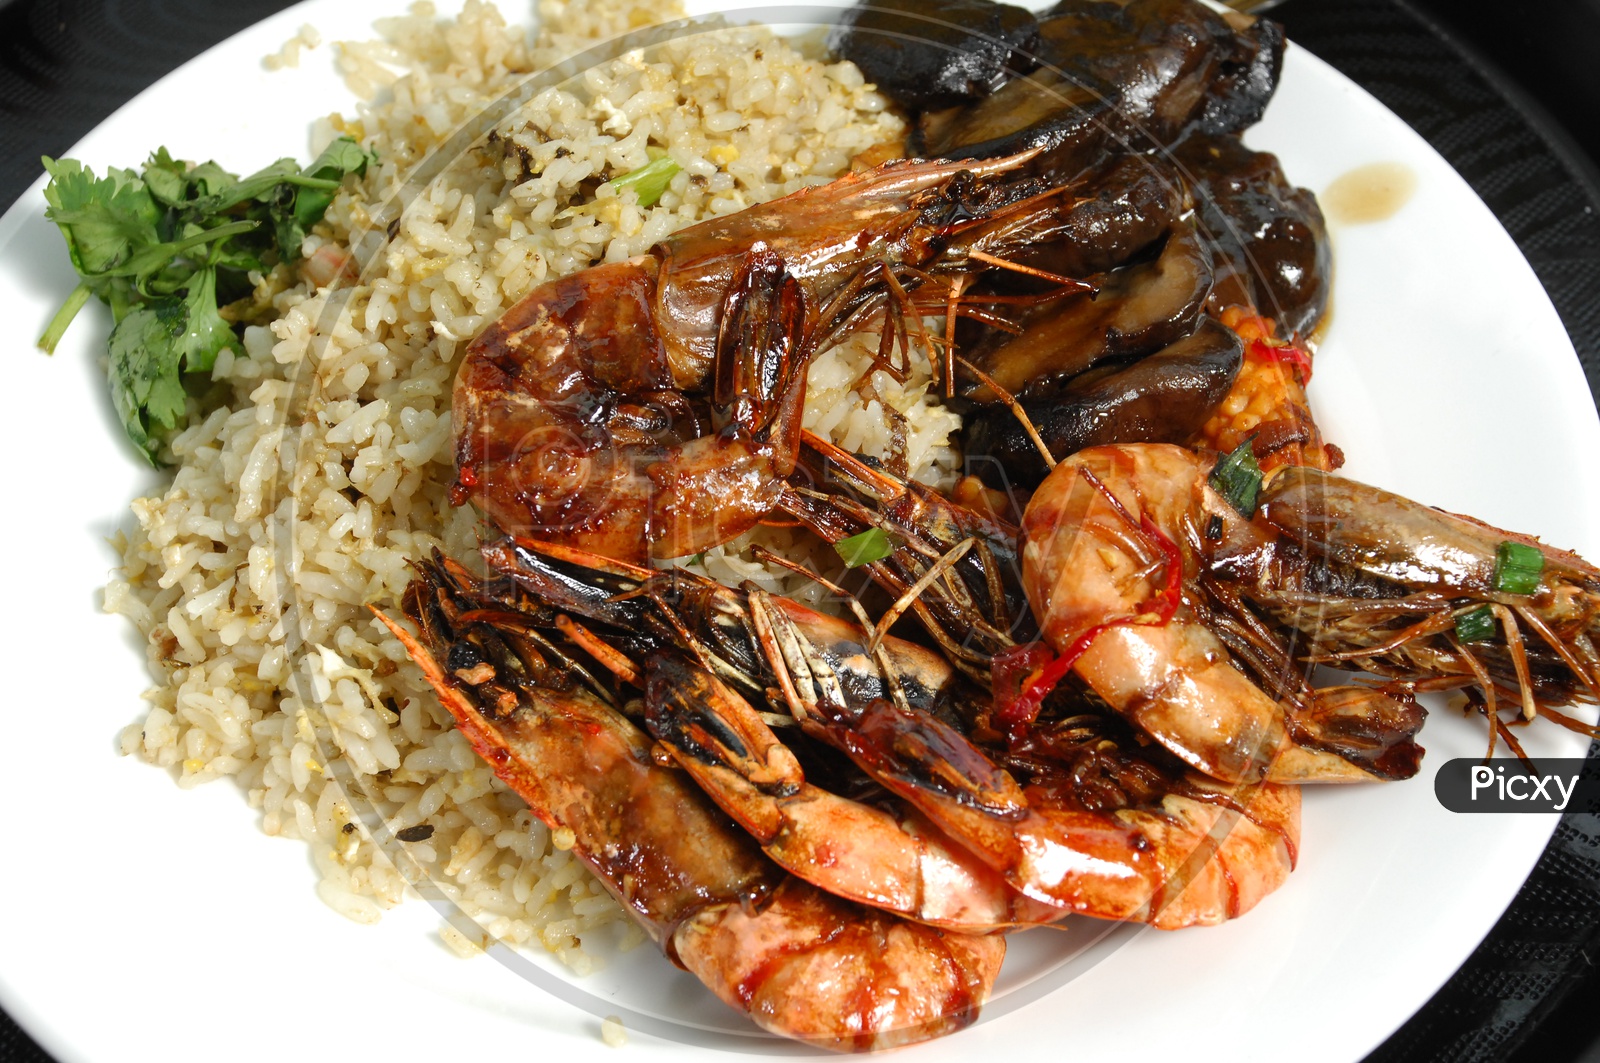 Cooked shrimps along with fried rice served in a white plate